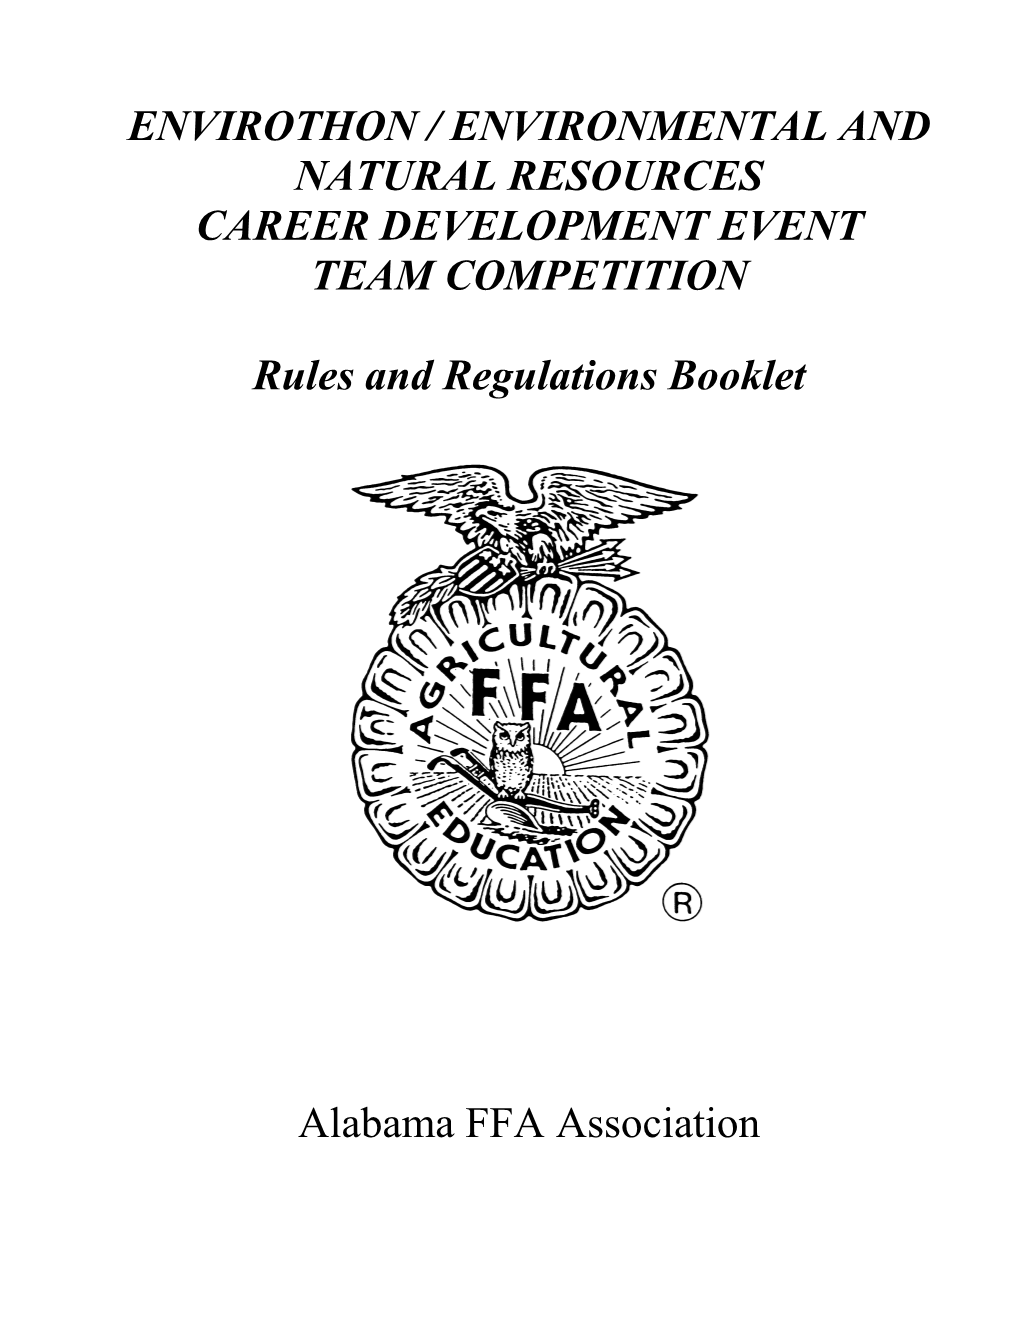 ENVIROTHON / ENVIRONMENTAL and NATURAL RESOURCES CAREER DEVELOPMENT EVENT TEAM COMPETITION Rules and Regulations Booklet Alabama